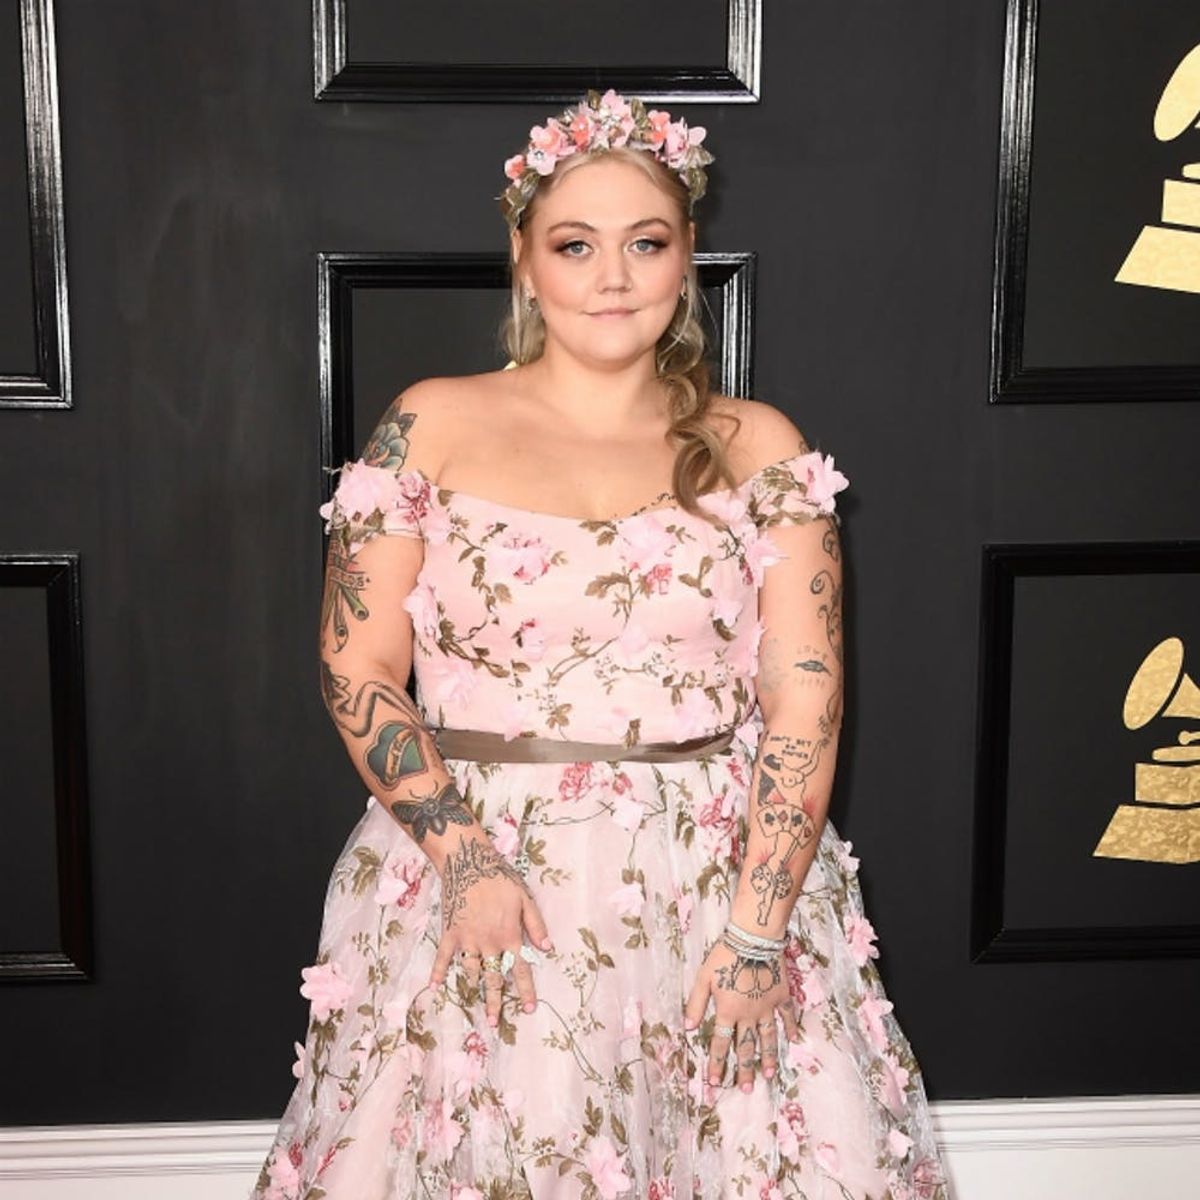 This Is the Reason Elle King Skipped Out on Her Wedding